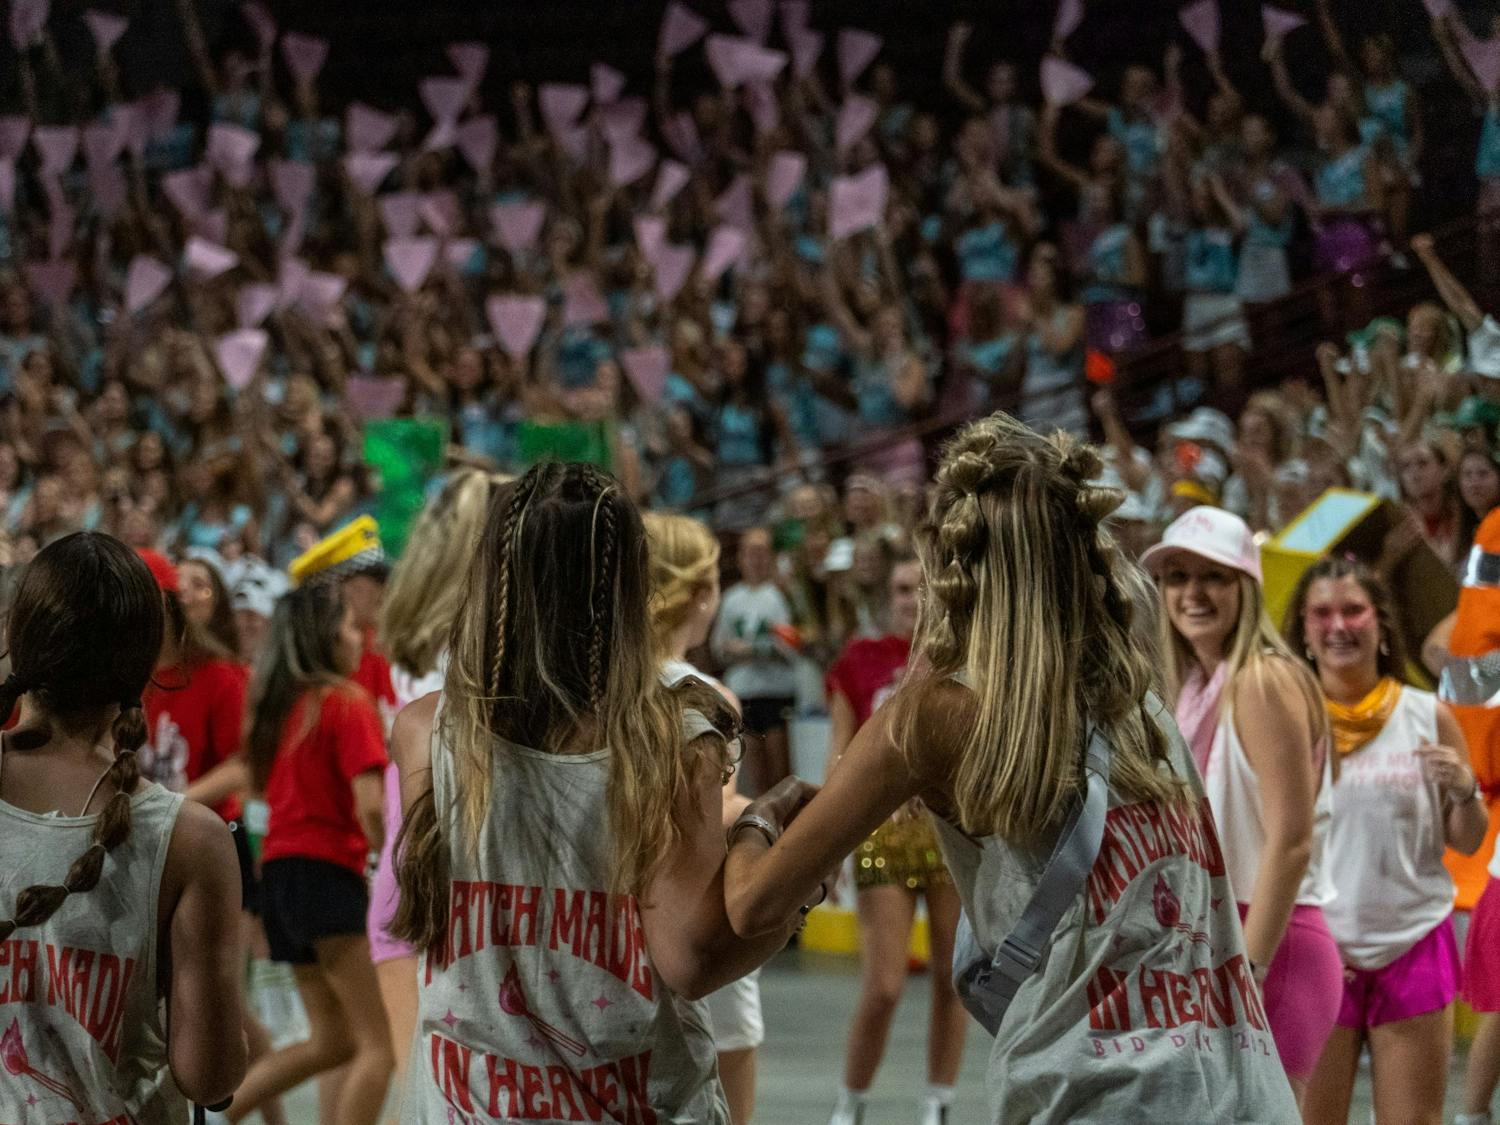 USC Sororities gathered Sunday afternoon, Aug. 21, 2022 at the Colonial Life Arena for Bid Day. New members ran out of the Colonial Life tunnels to join their sororities at the center of the arena.